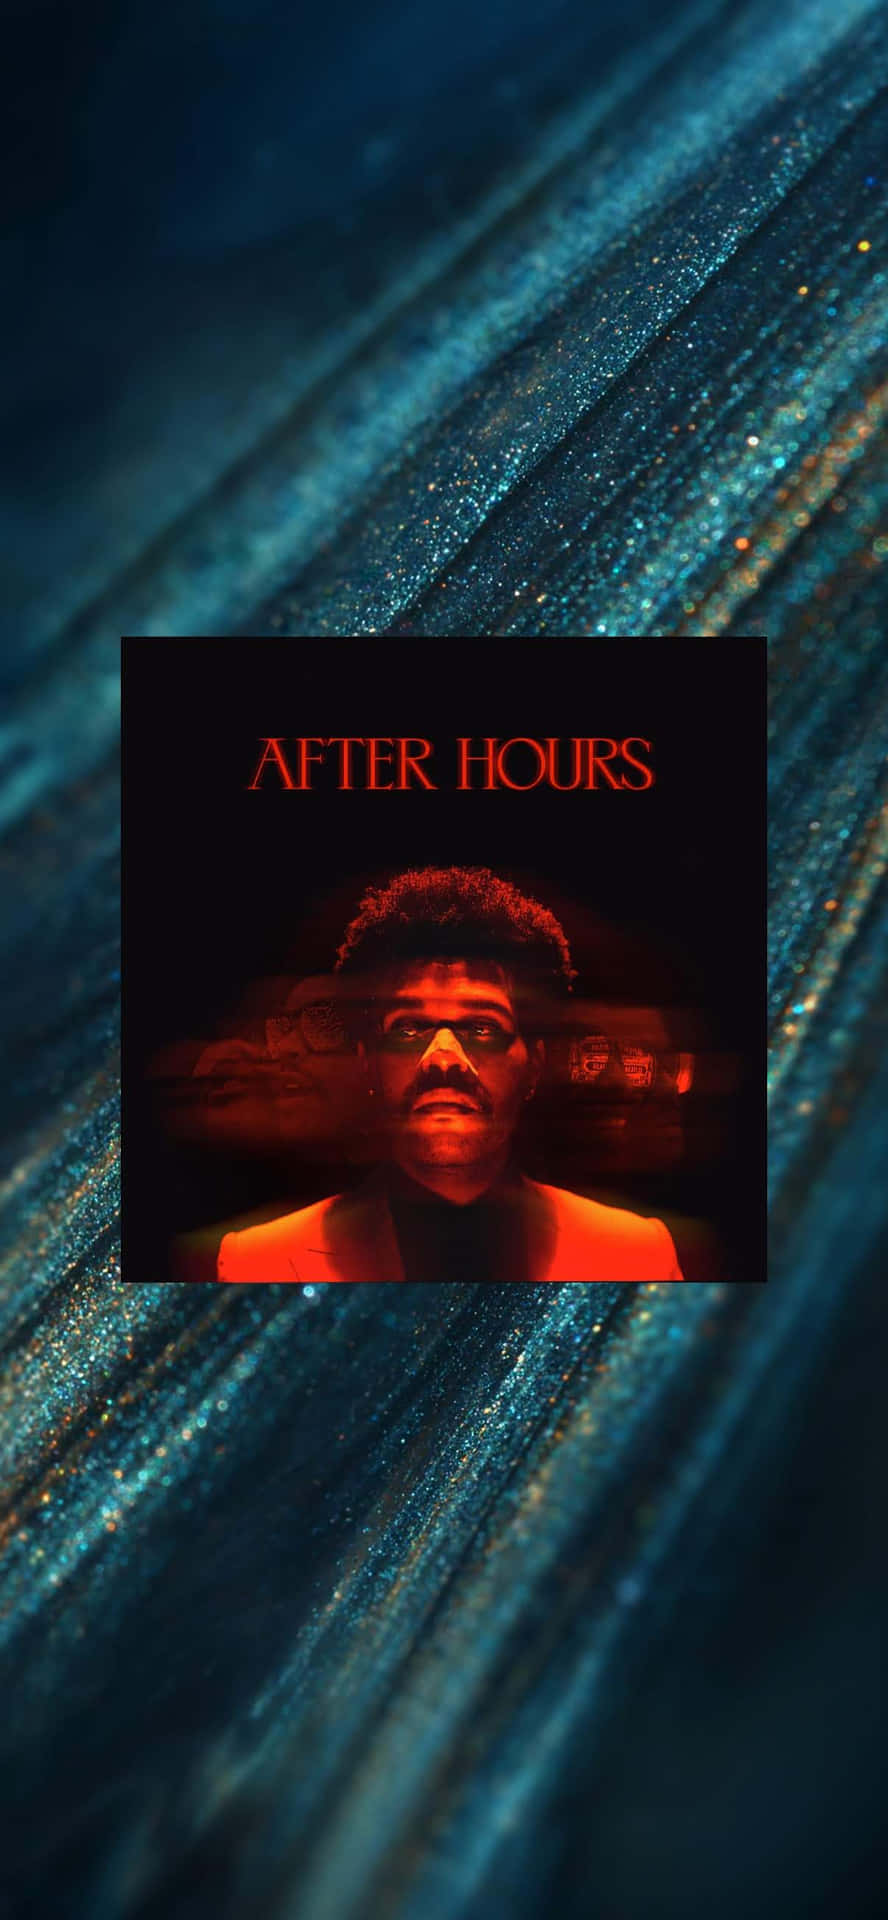 Download The Weeknd - After Hours: Captivating Album Art Wallpaper